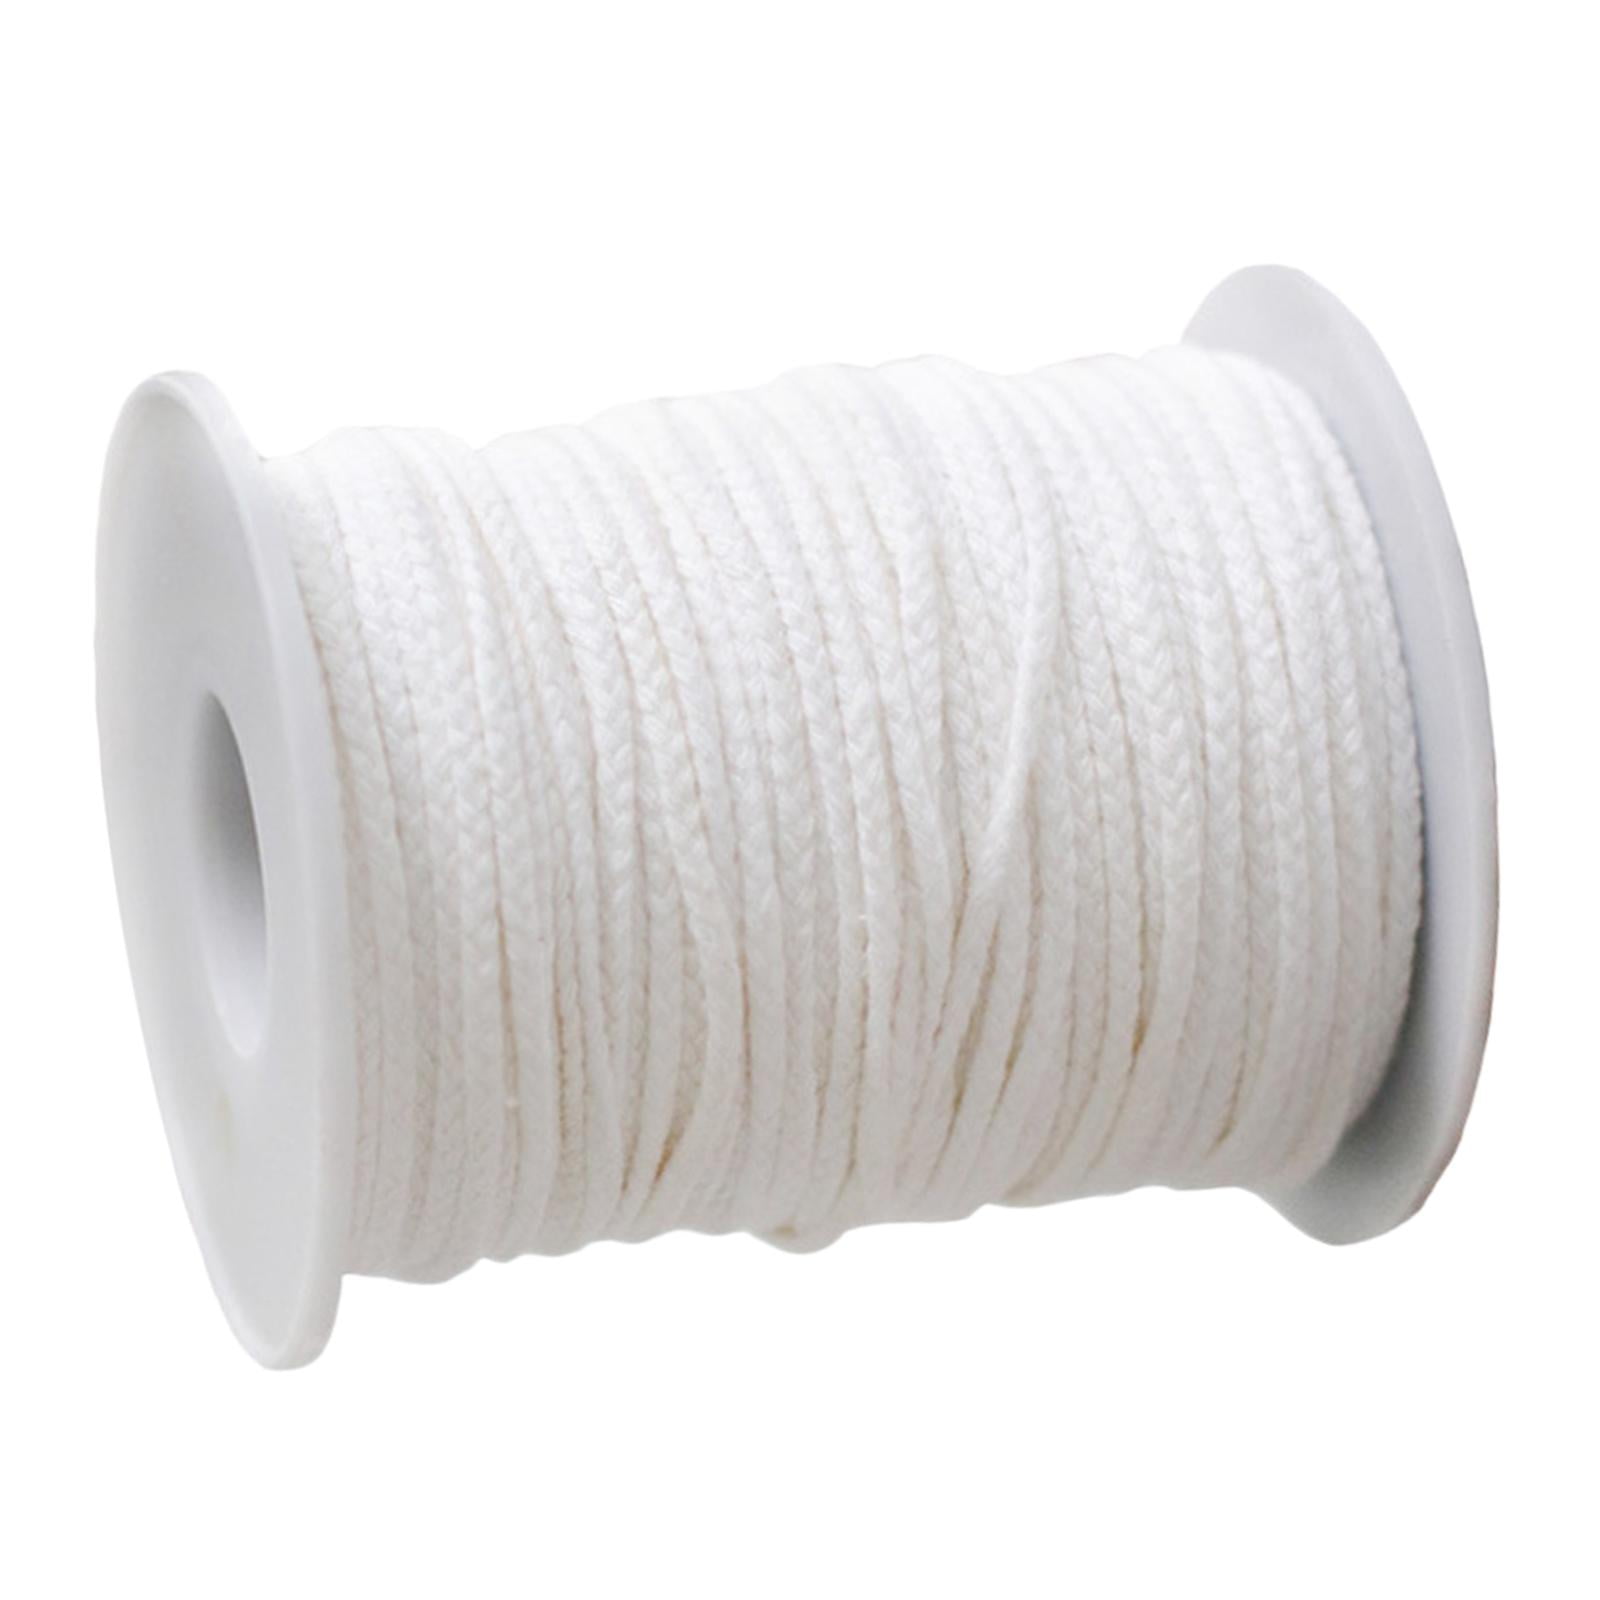 Candle Wick 1.5mm Thick 30 Ft Long 100% Cotton 